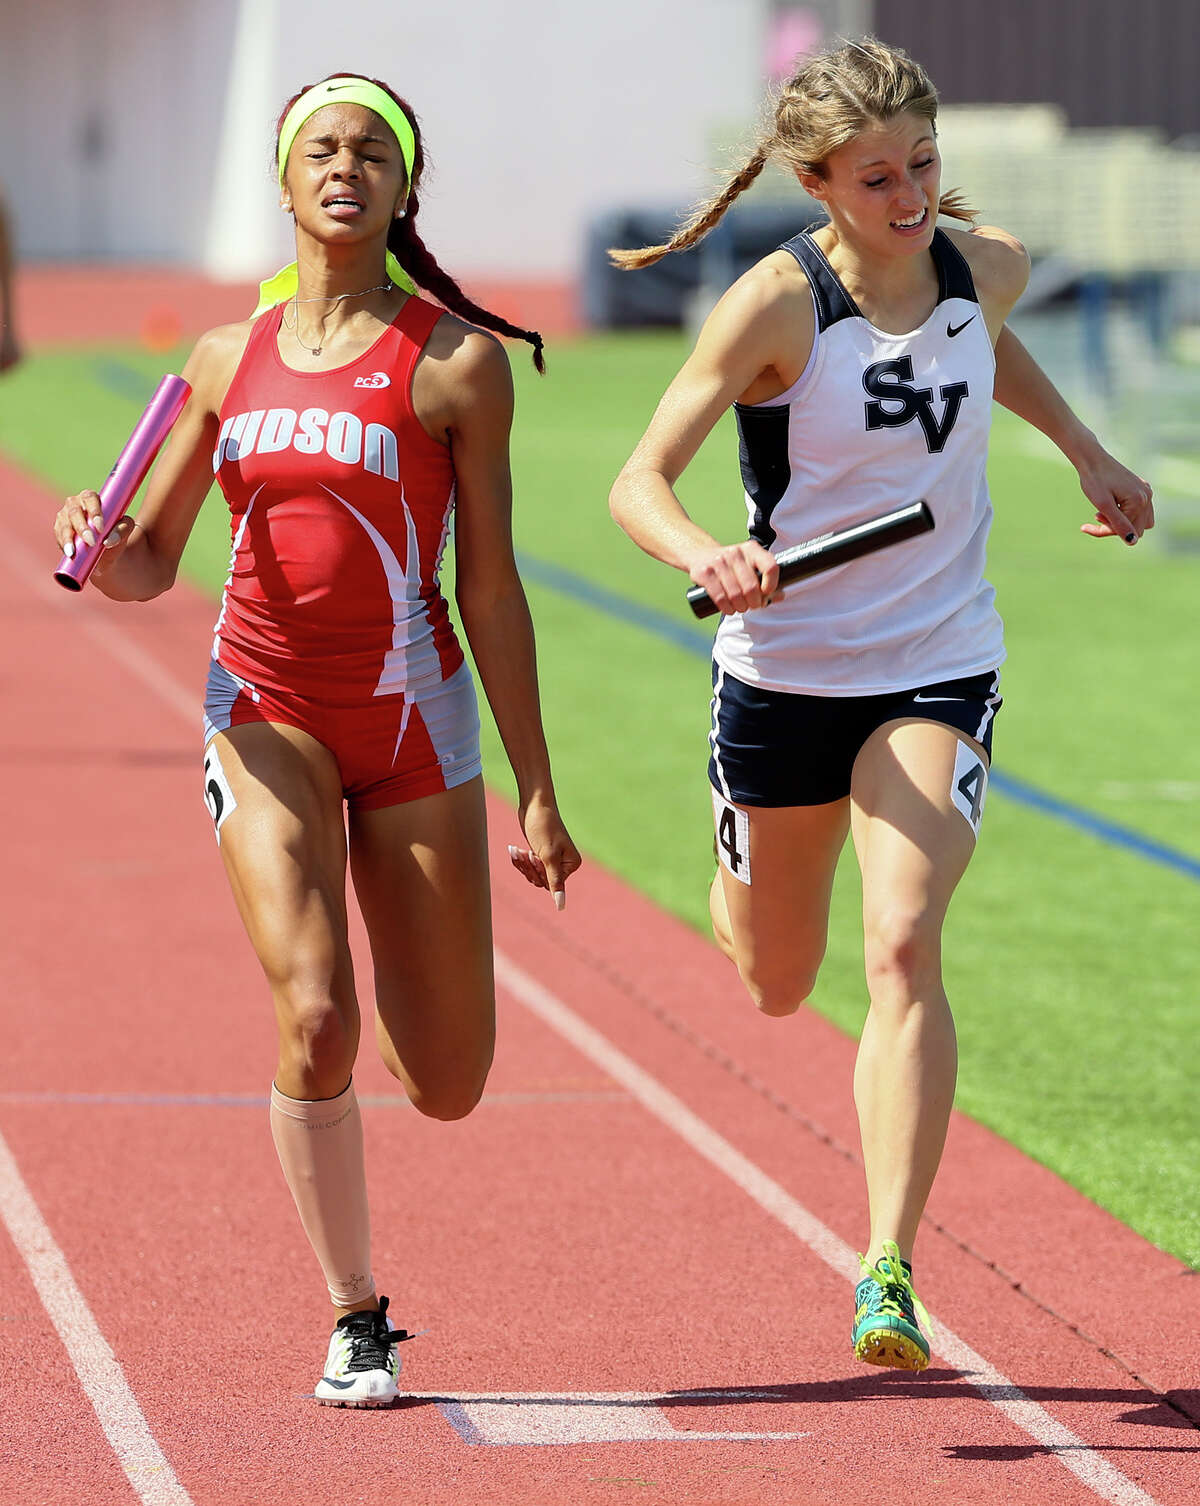 Judson’s Mariah Kuykendoll (left) battles Smithson Valley’s Reagan Bachman to the finish line of the 6A girls 1,600-meter relay during the finals of the Region IV-6A/5A track and field championships at Alamo Stadium on April 30, 2016.